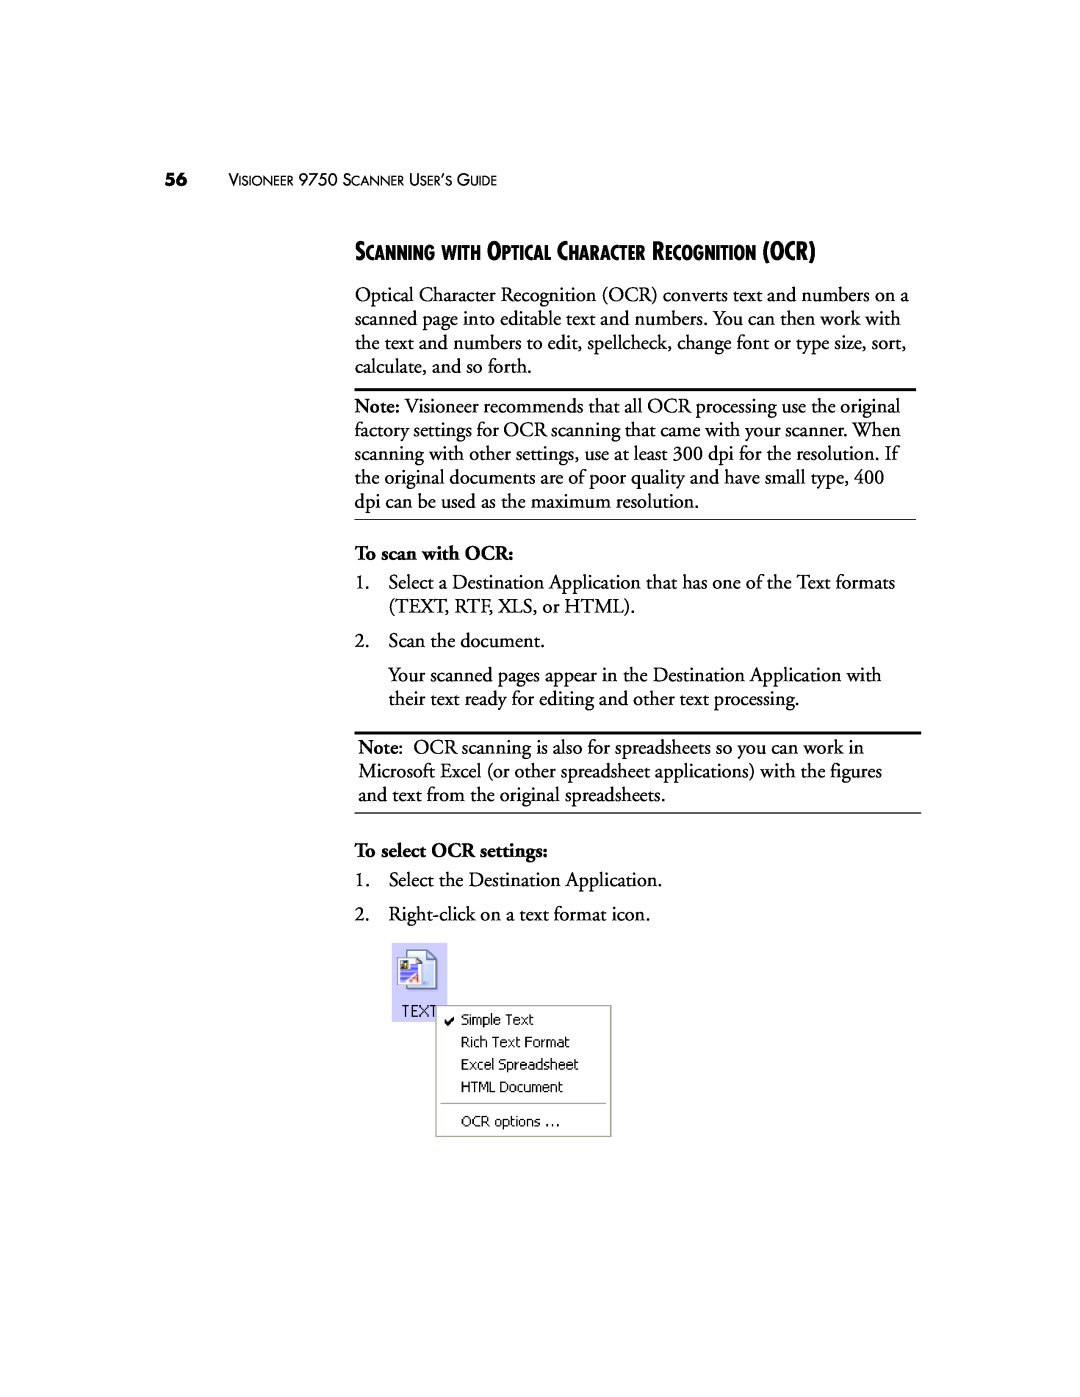 Visioneer 9750 manual Scanning With Optical Character Recognition Ocr, To scan with OCR, To select OCR settings 